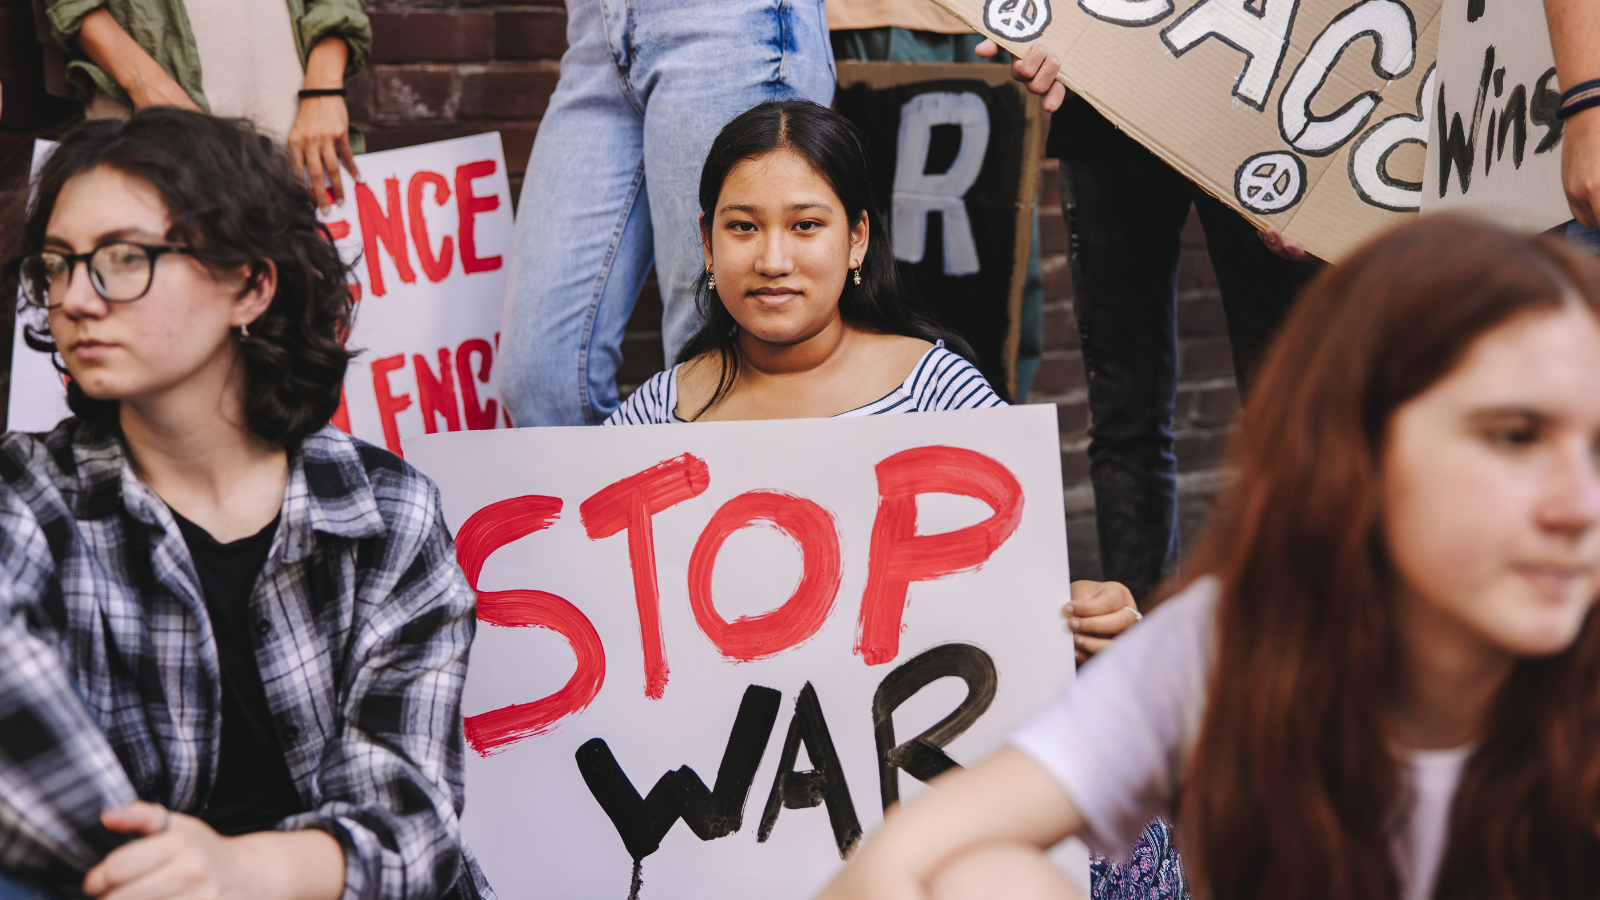 Student holds "stop war" sign at protest